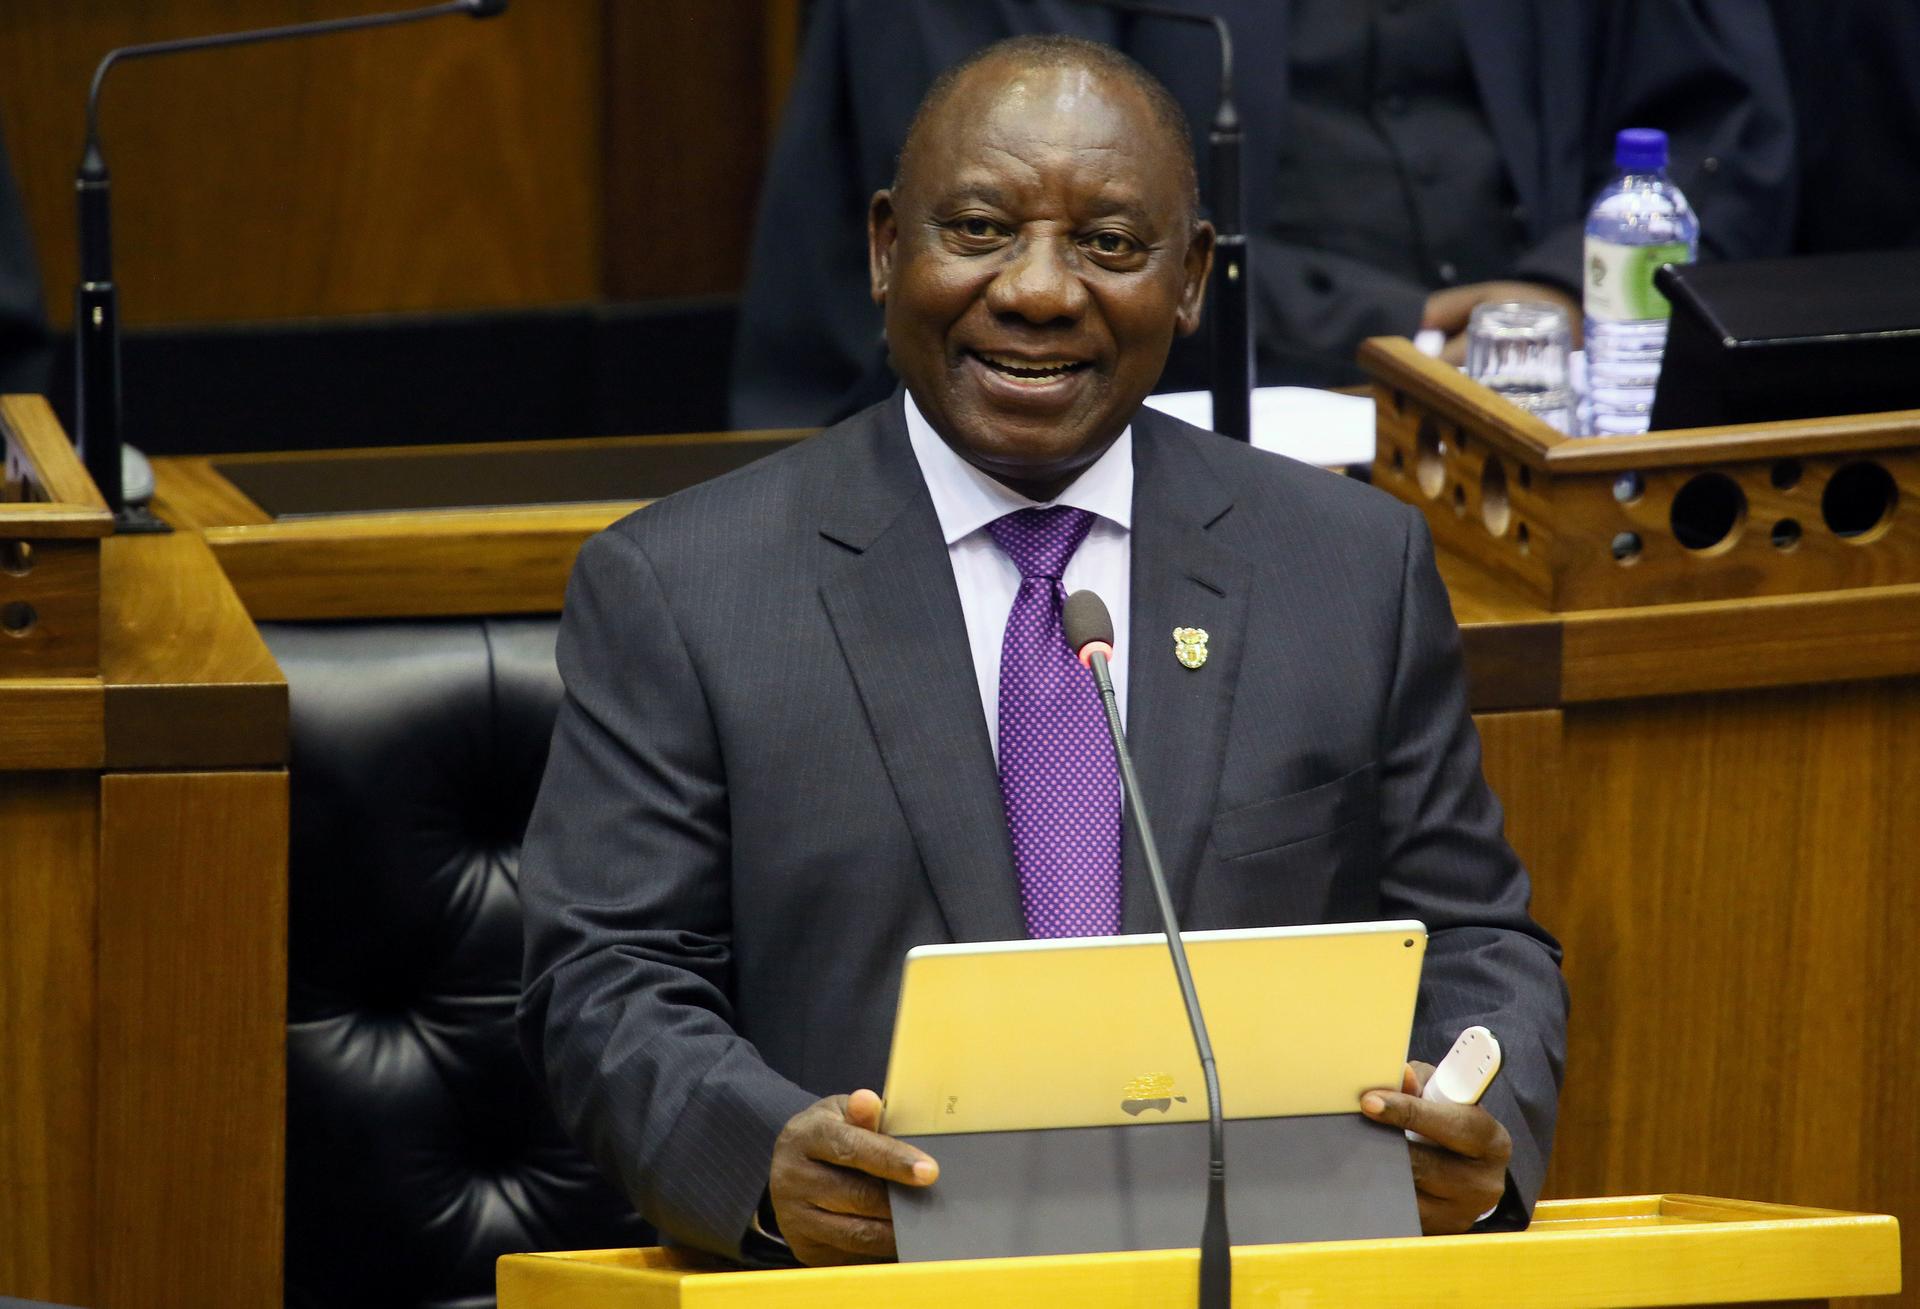 President Cyril Ramaphosa delivers his State of the Nation address